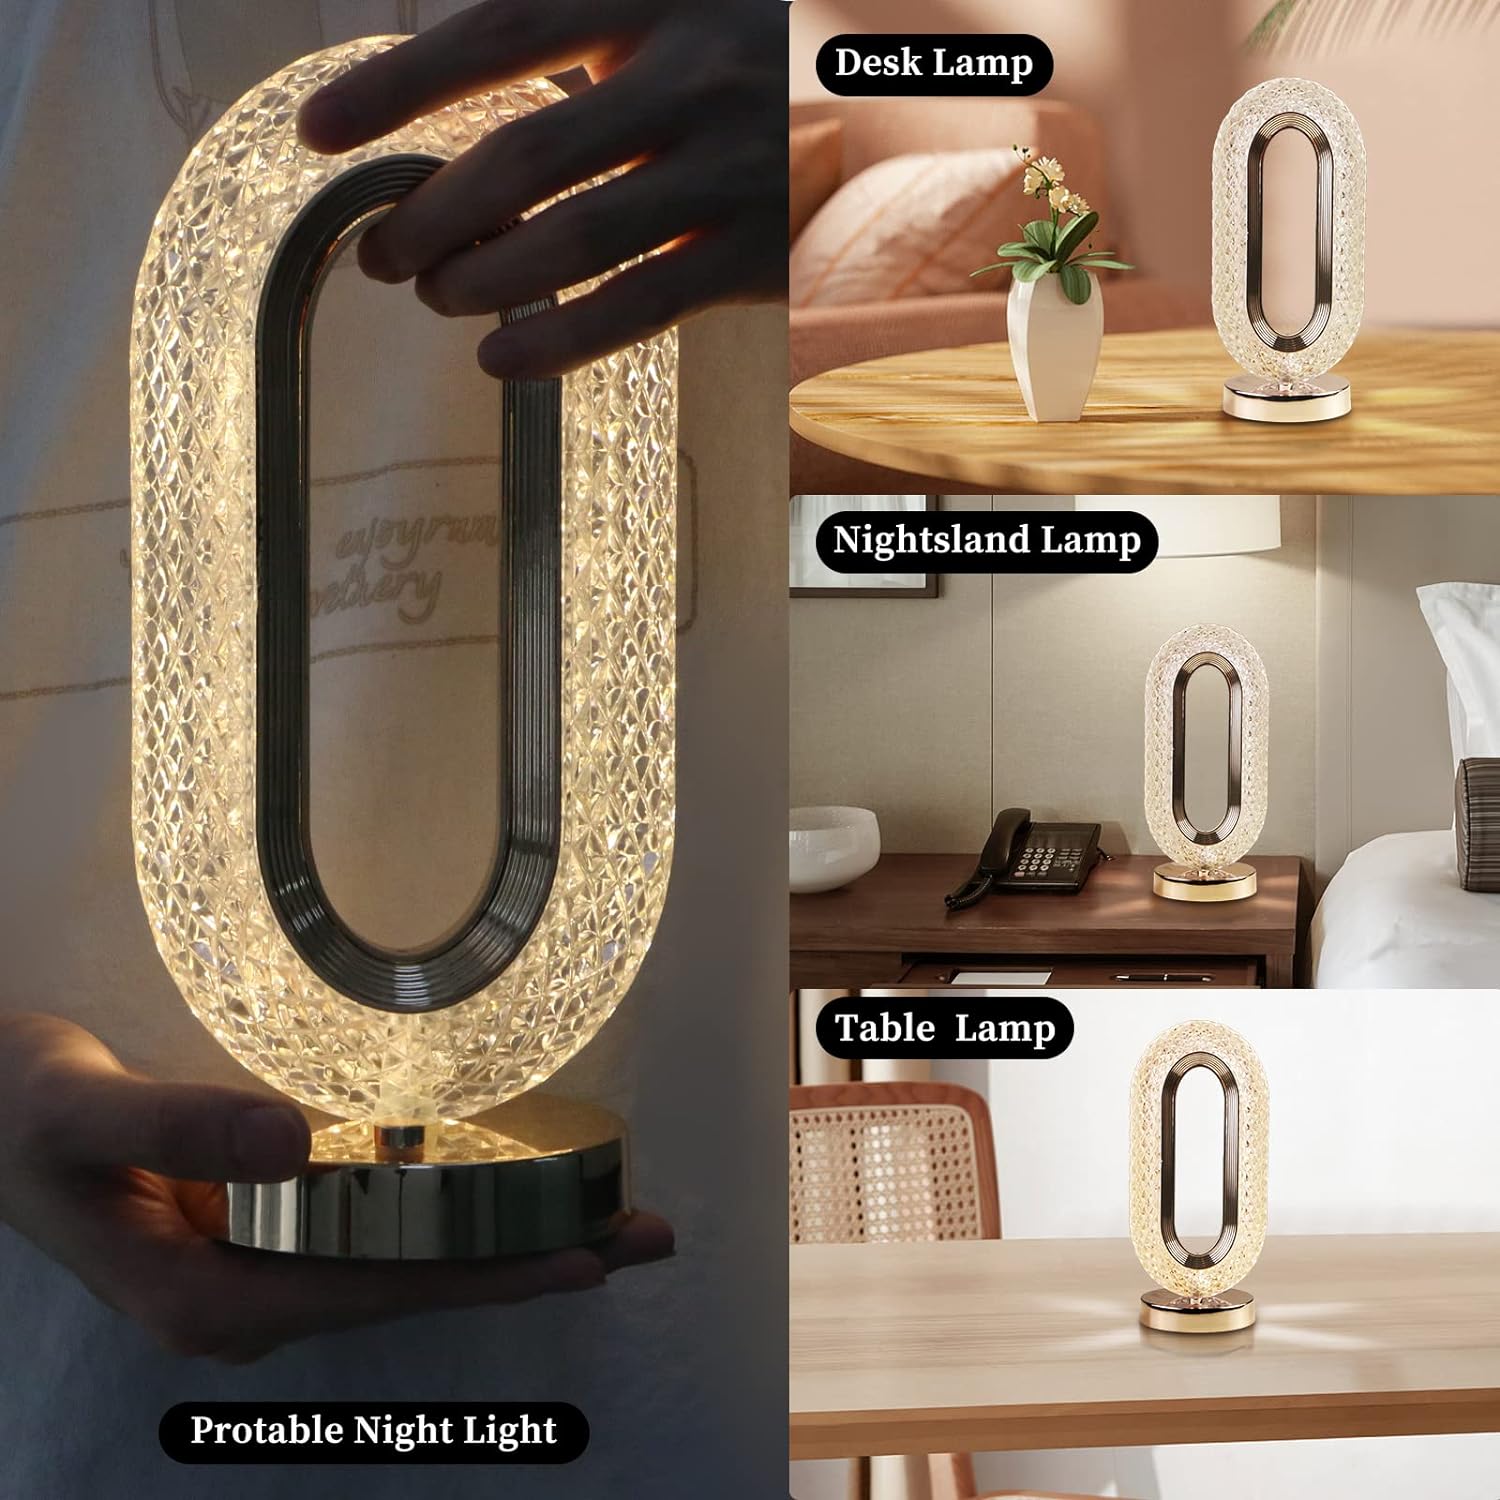 Touch Control Crystal Table Desk Lamp, 3-Way Dimmable Light, USB Rechargeable Crystal Diamond Table Lamp, Exquisite Night Stand Light Lamp Beside Lamp for Bedroom Living Room, Decorative Desk Lamp